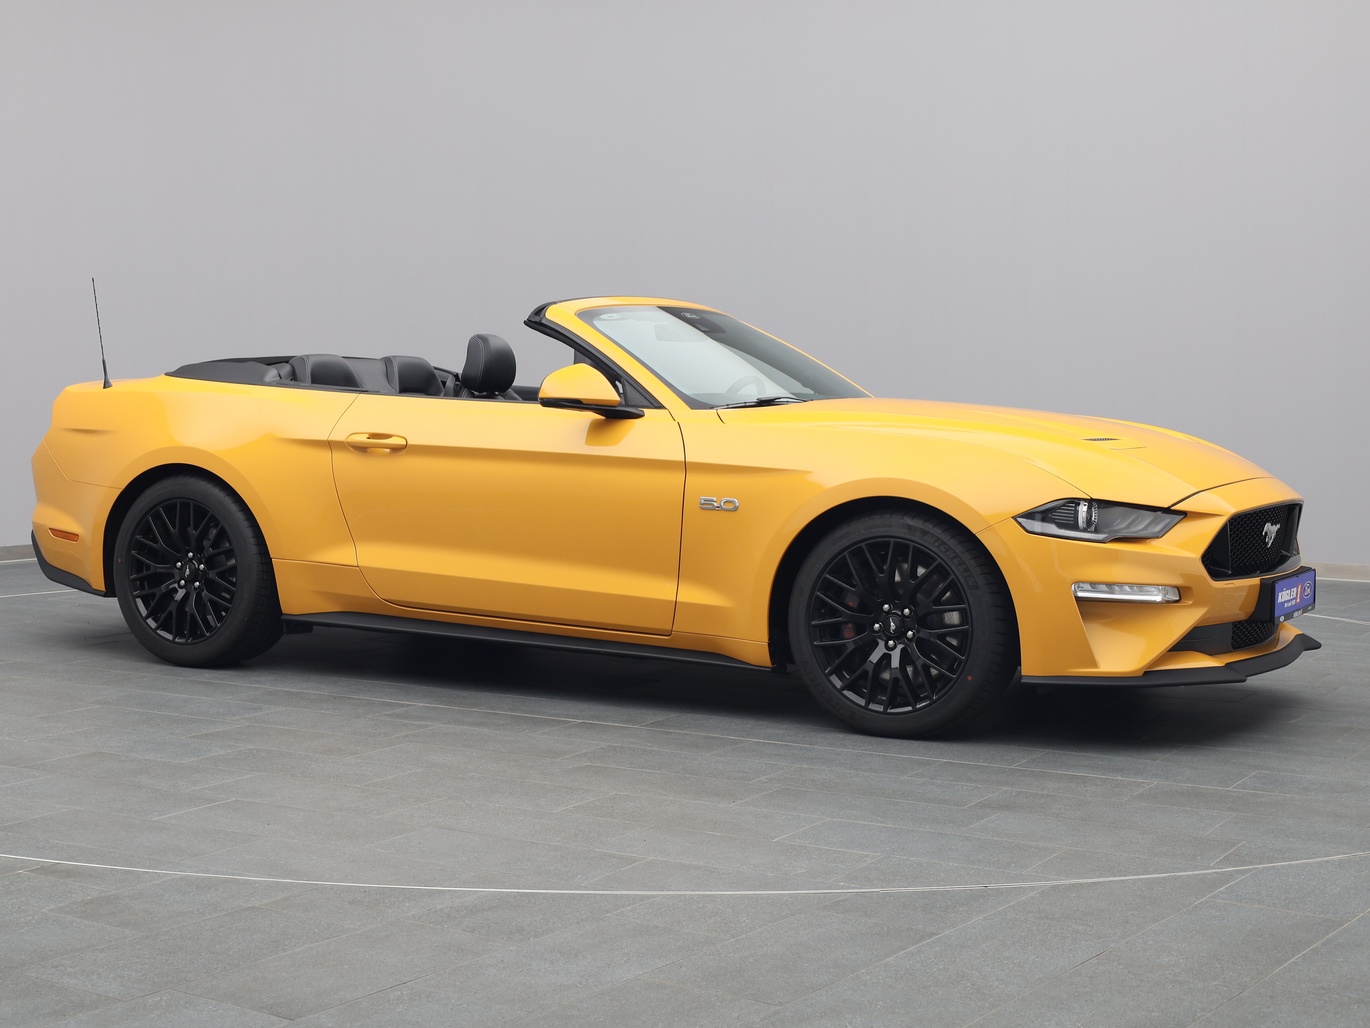  Ford Mustang GT Cabrio V8 450PS / Premium 2 / Magne in Cyber Orange 